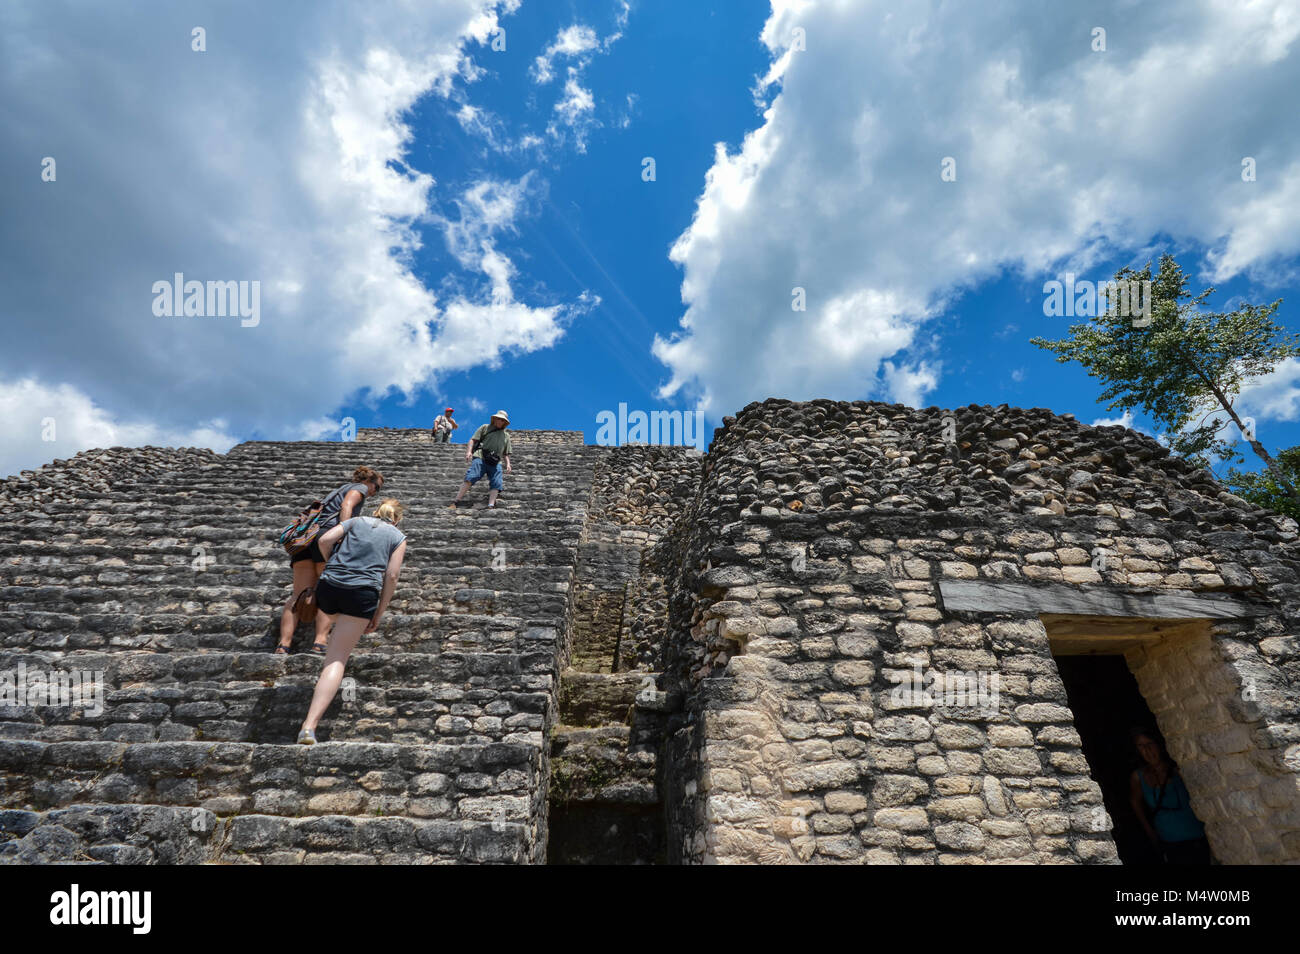 Caracol, Cayo District, Belize - March 22, 2015: Tourists climb the stairs of Caana pyramid at Caracol archaeological site of Maya civilization, Weste Stock Photo